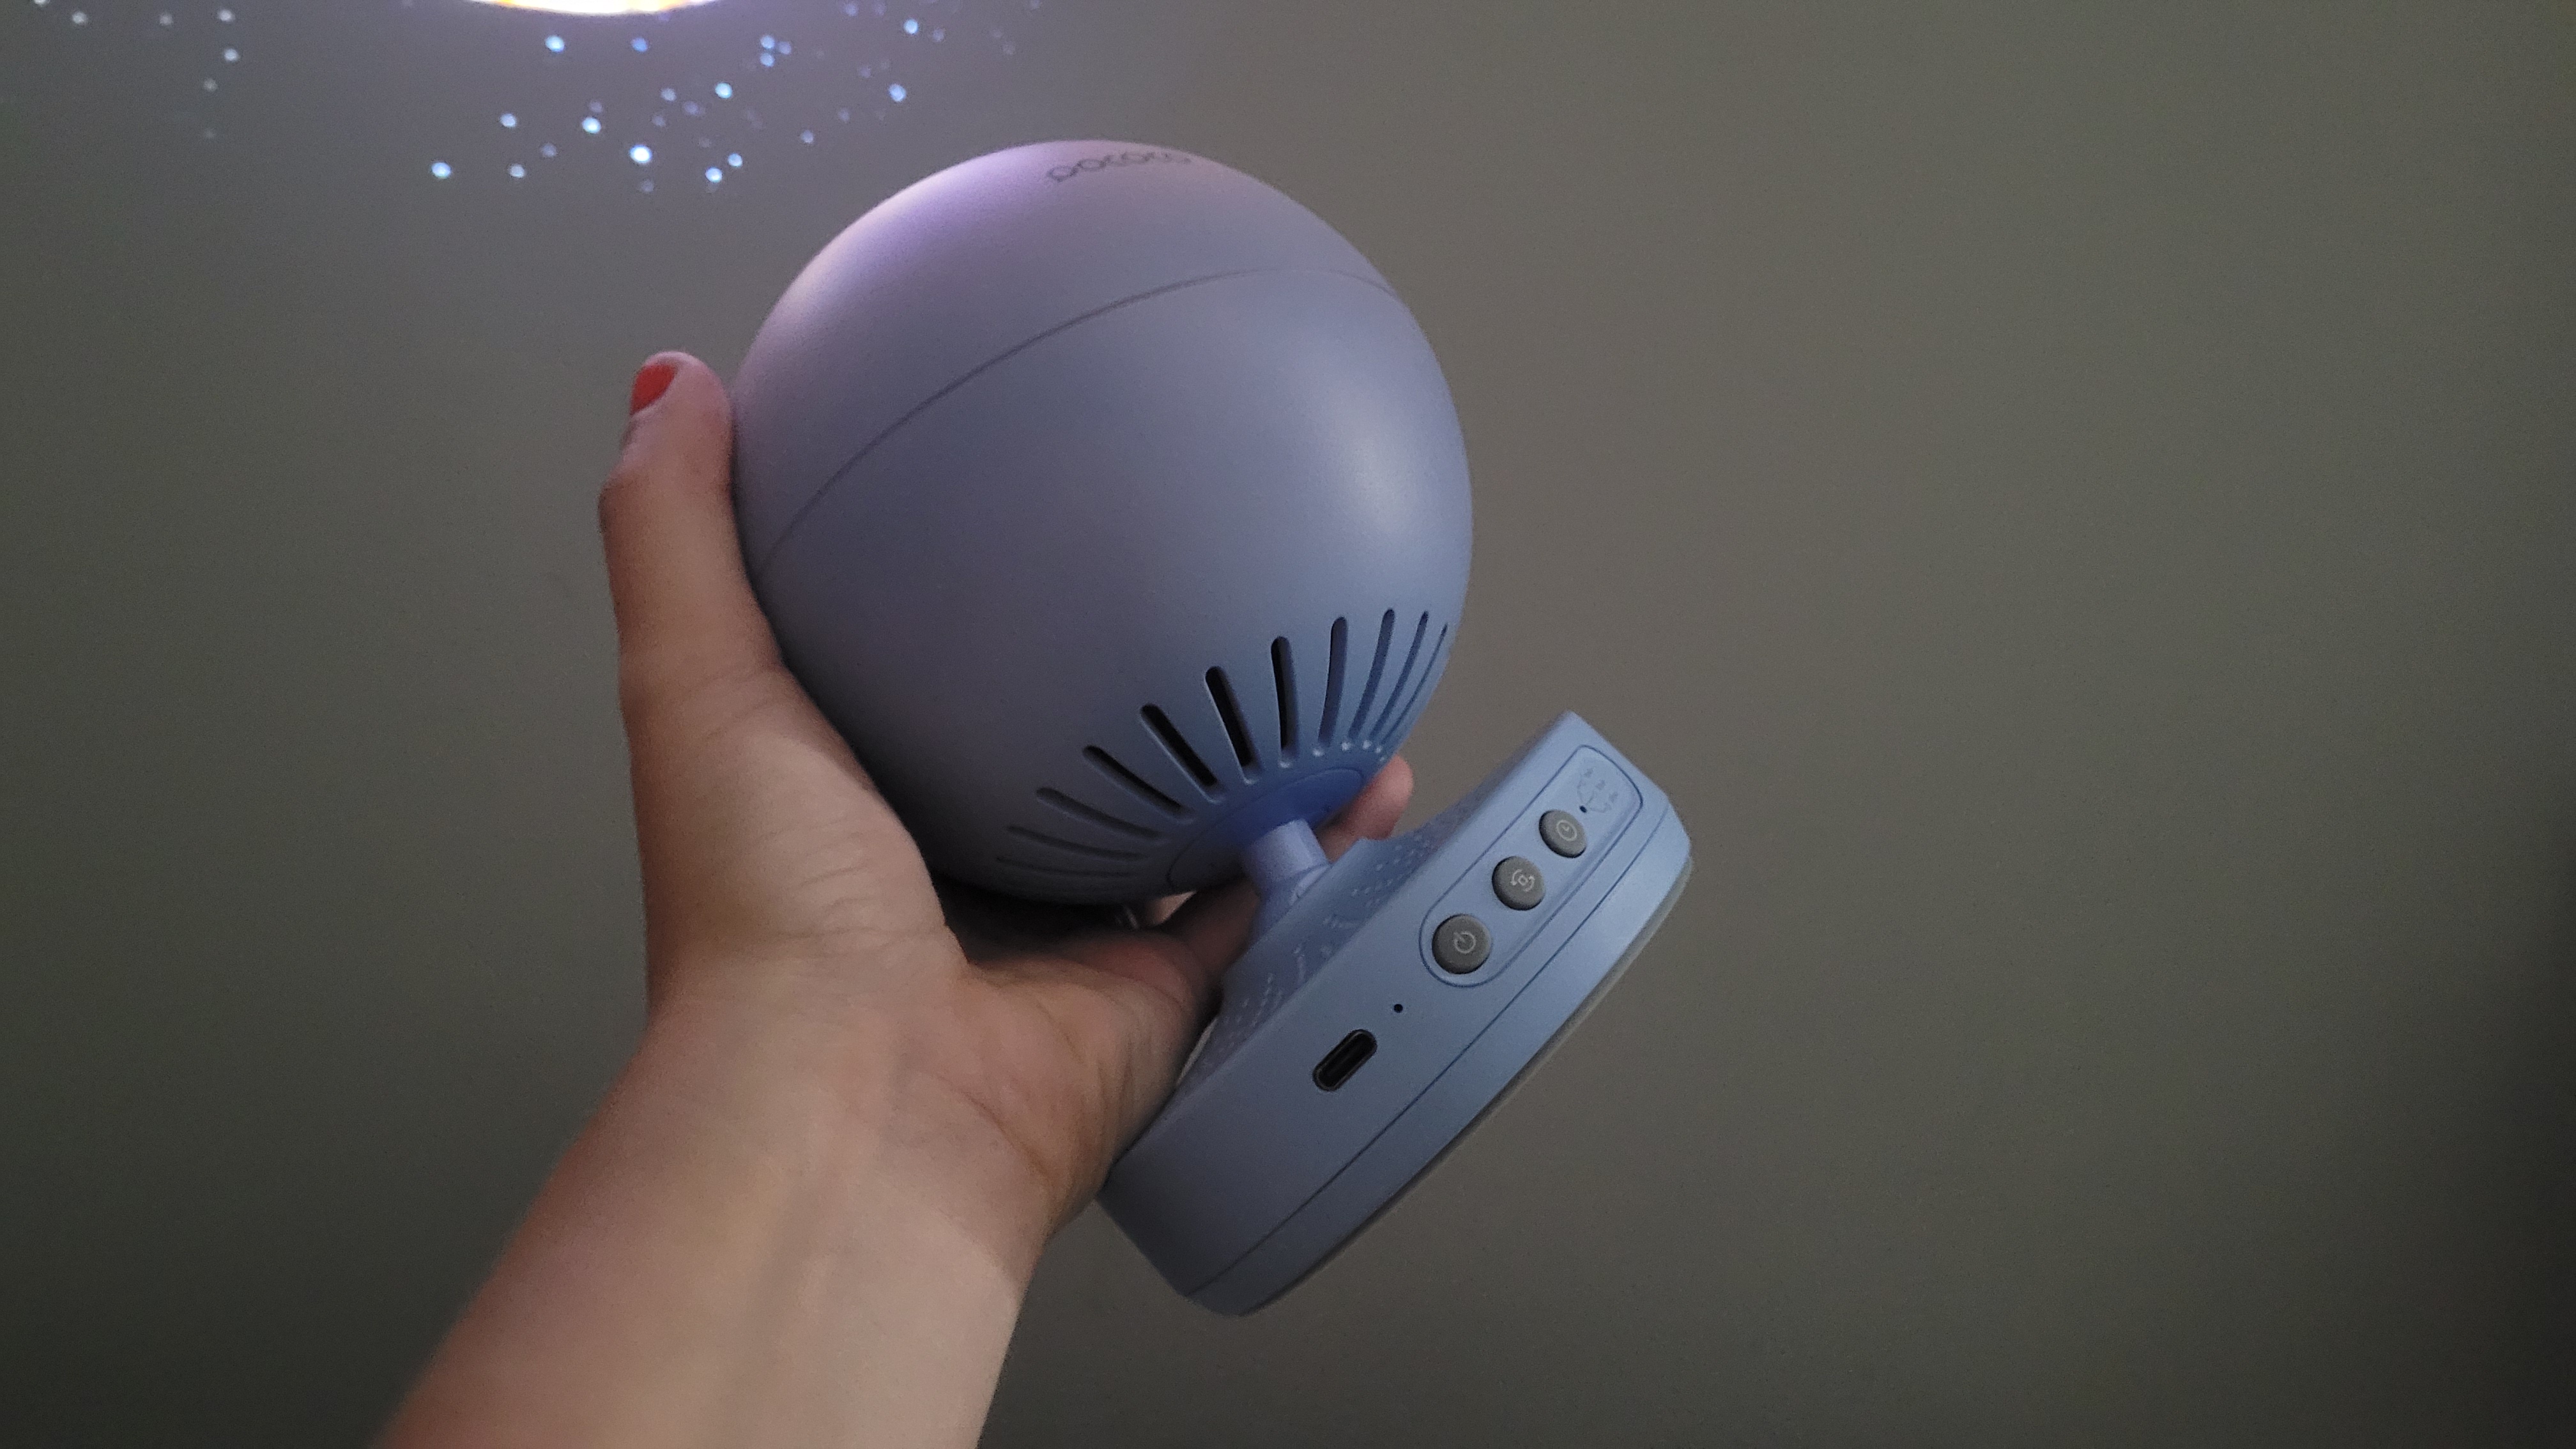 Review photo of the Pococo Galaxy Projector being held up in a dark room